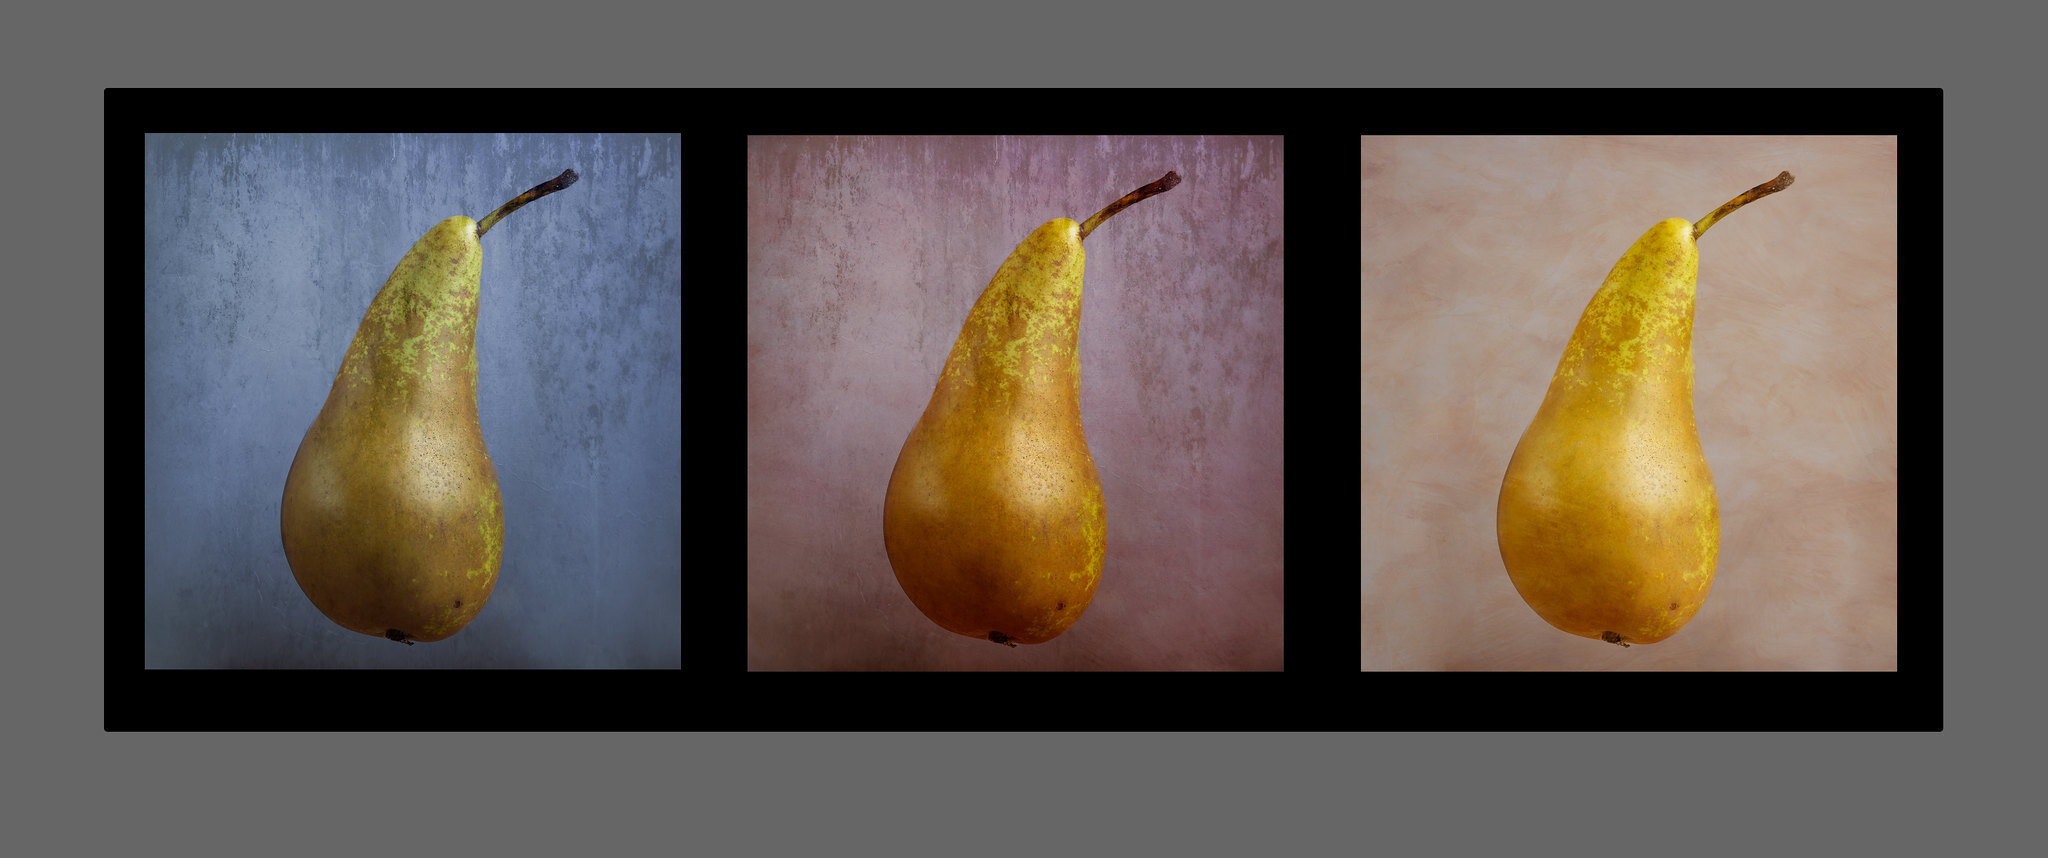 Still Life Pears in a Grid